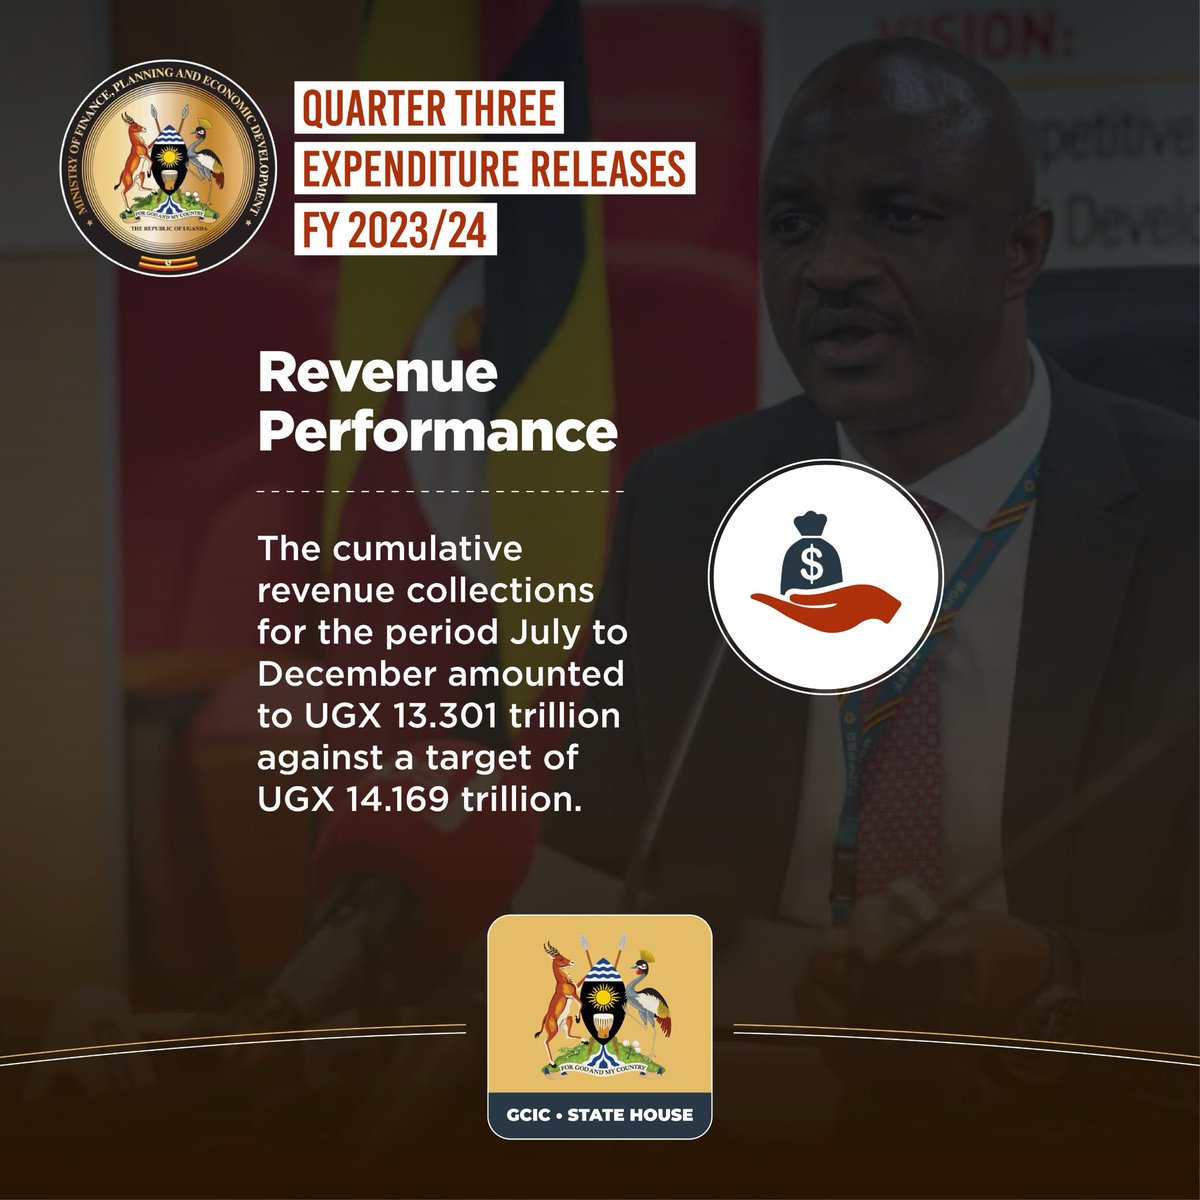 Impressive revenue performance from July to December 2023 amounted to UGX 13.301 trillion against a target of UGX 14.169 trillion. #BudgetTransparency #OpenGovtUg